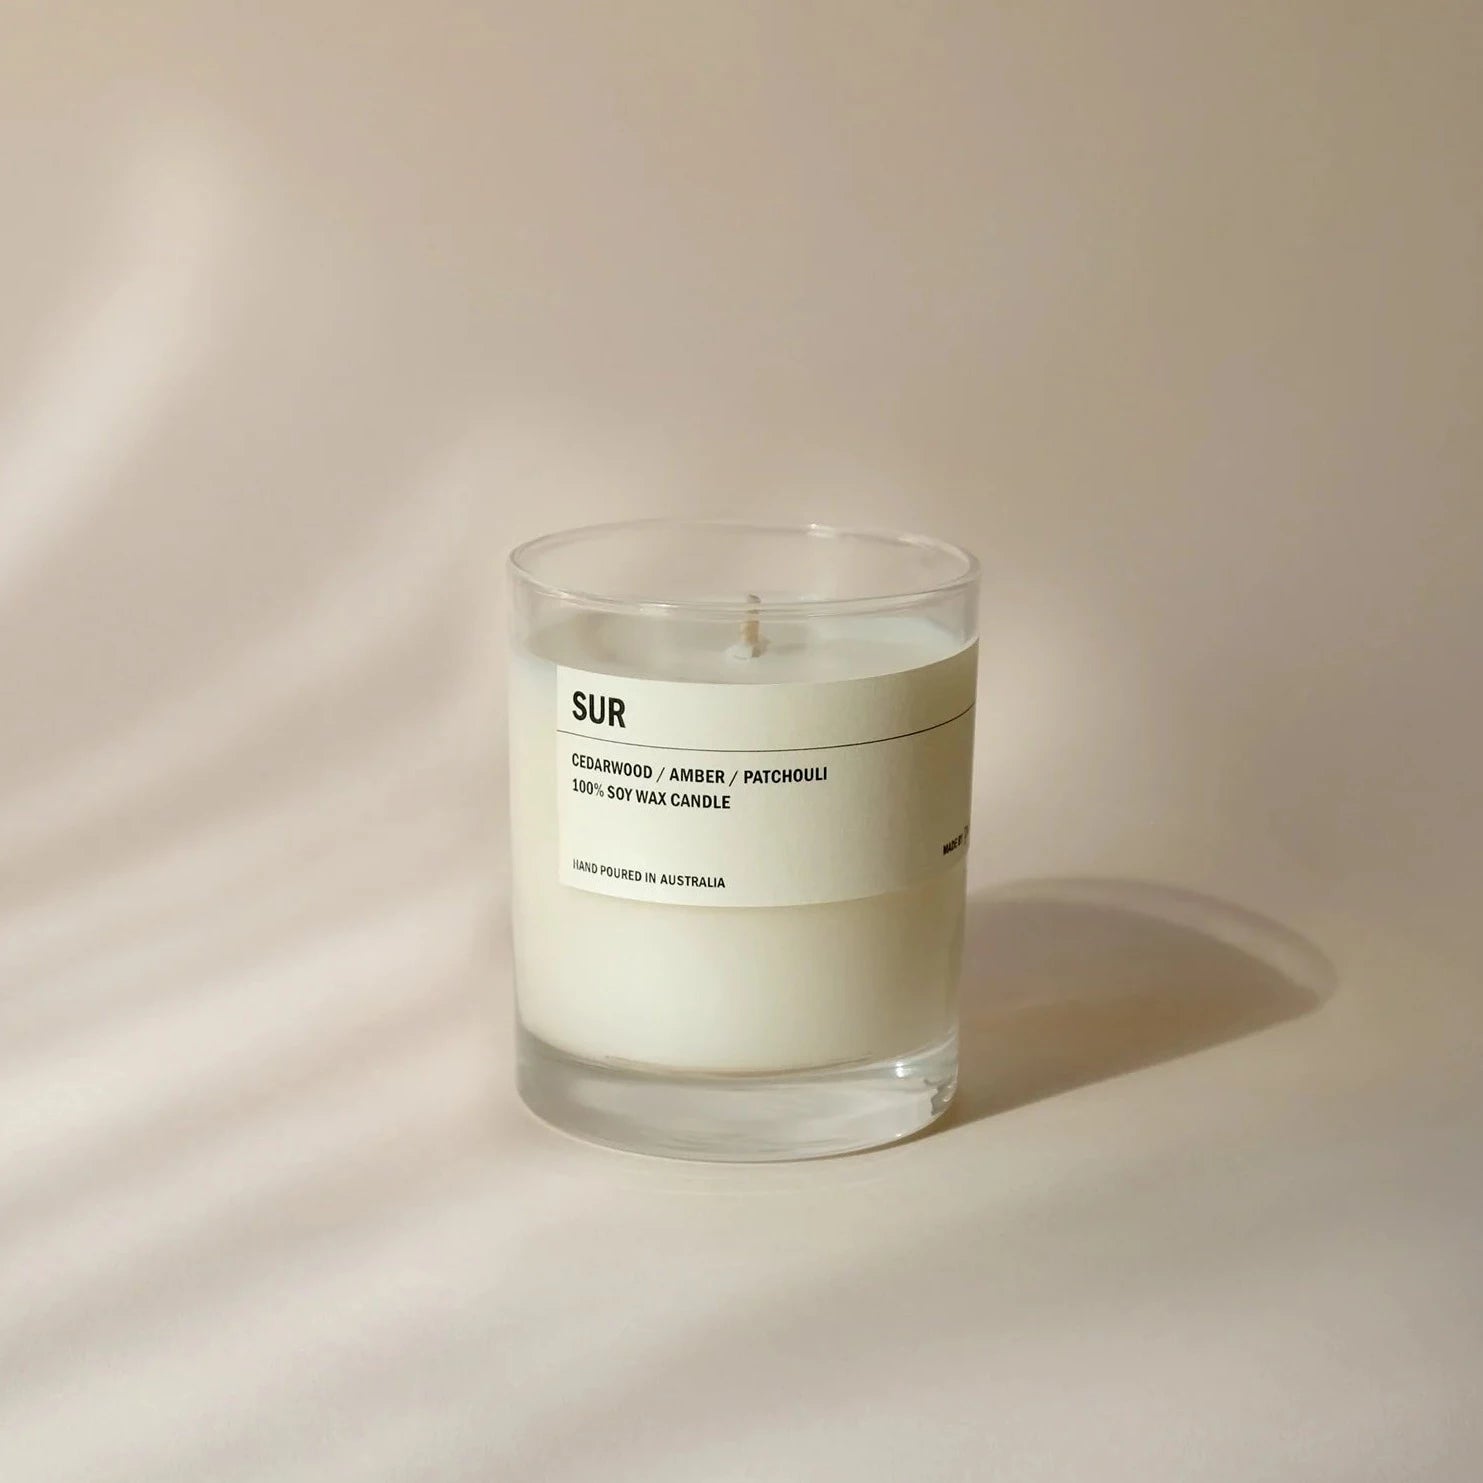 SUR Soy Wax Candle by Posie